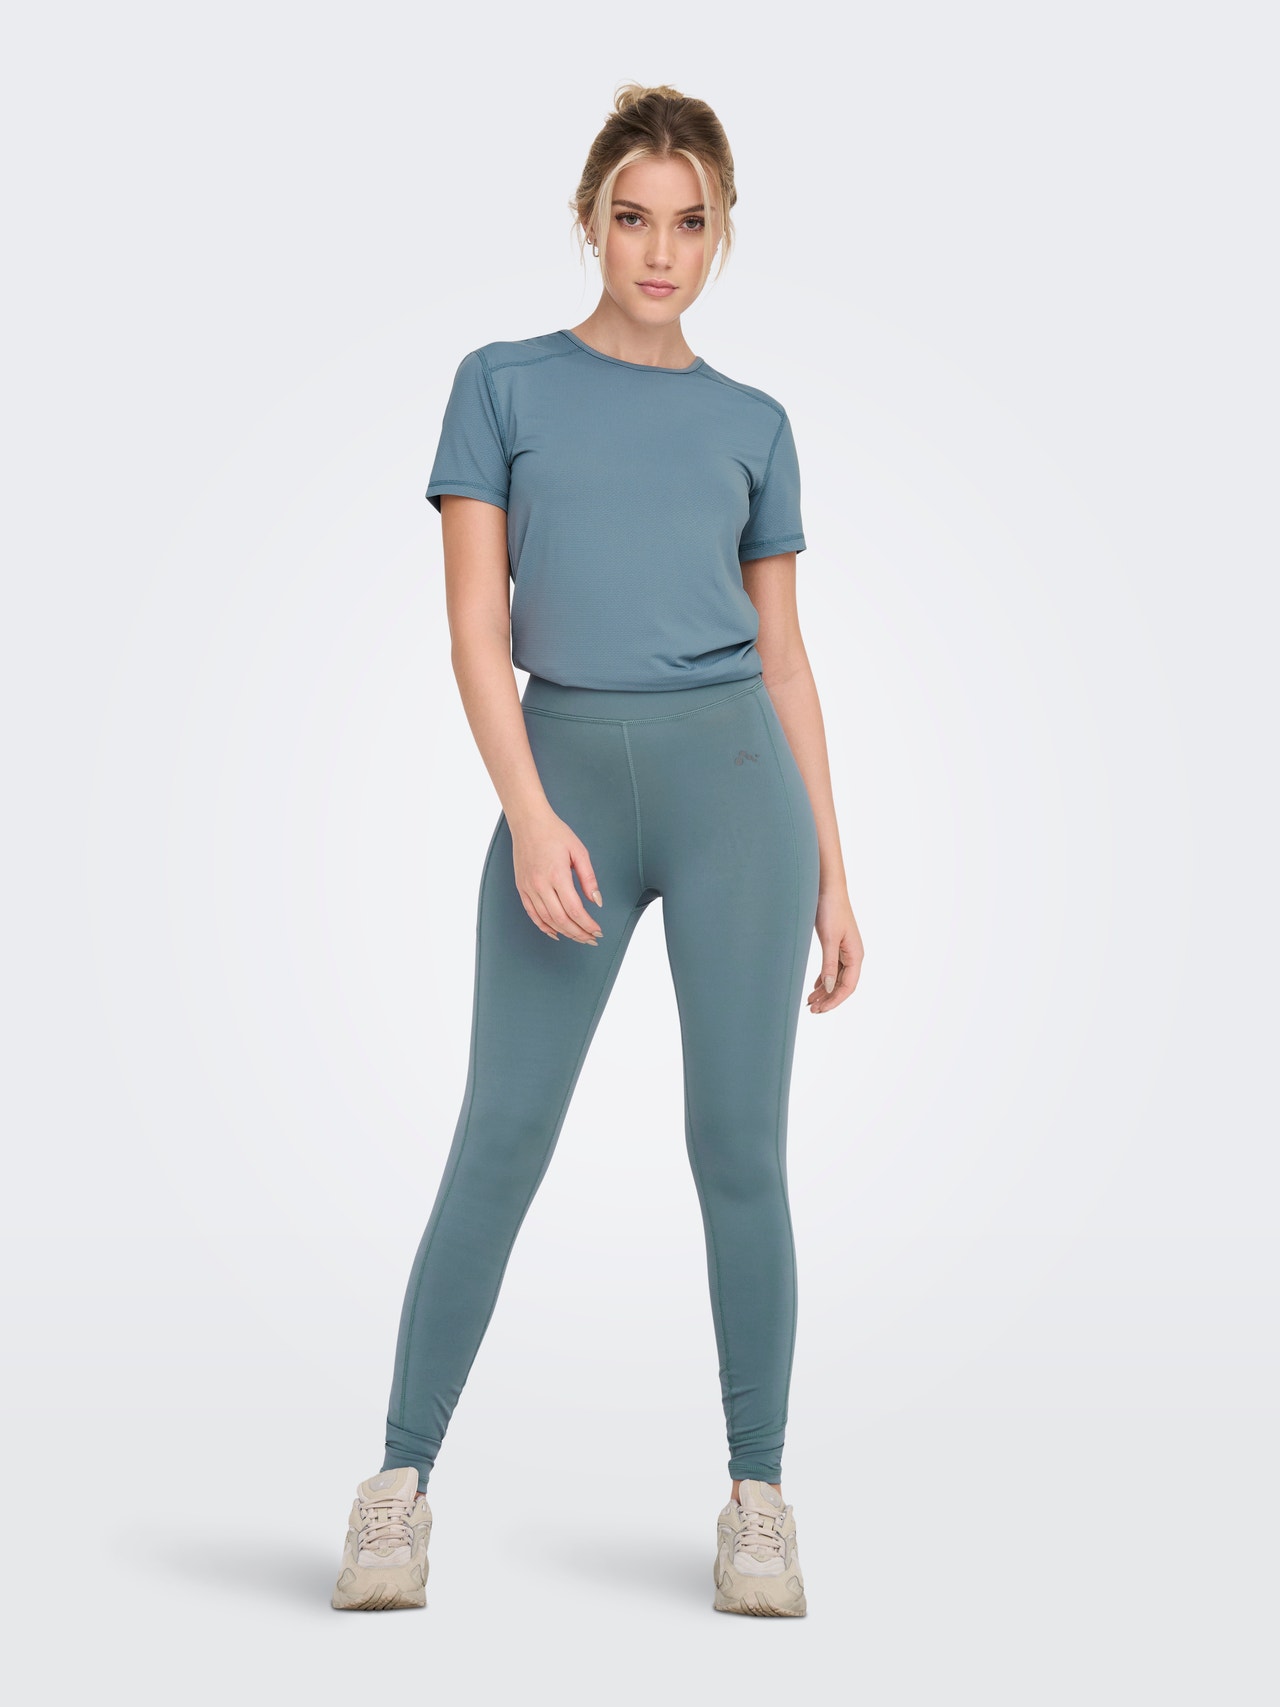 ONLY Tight Fit High waist Leggings -Blue Mirage - 15274629